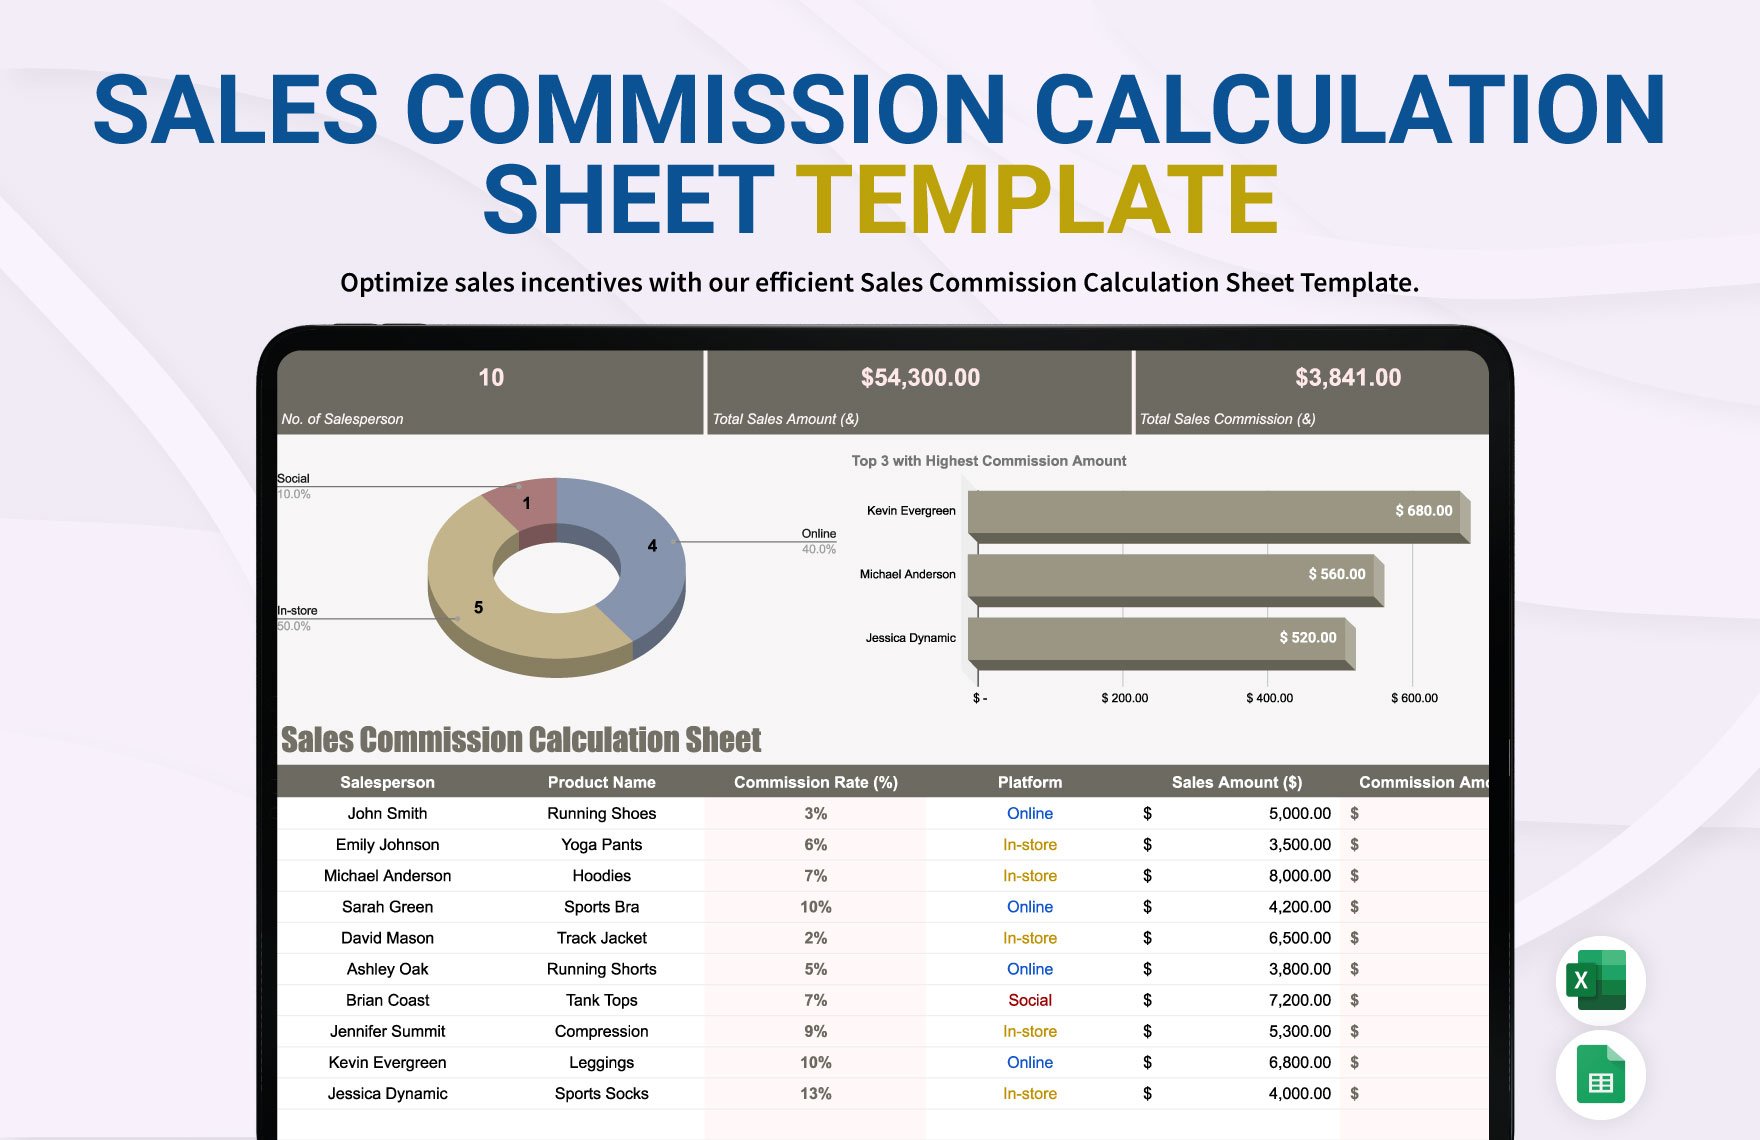 Sales Commission Calculation Sheet Template in Excel, Google Sheets